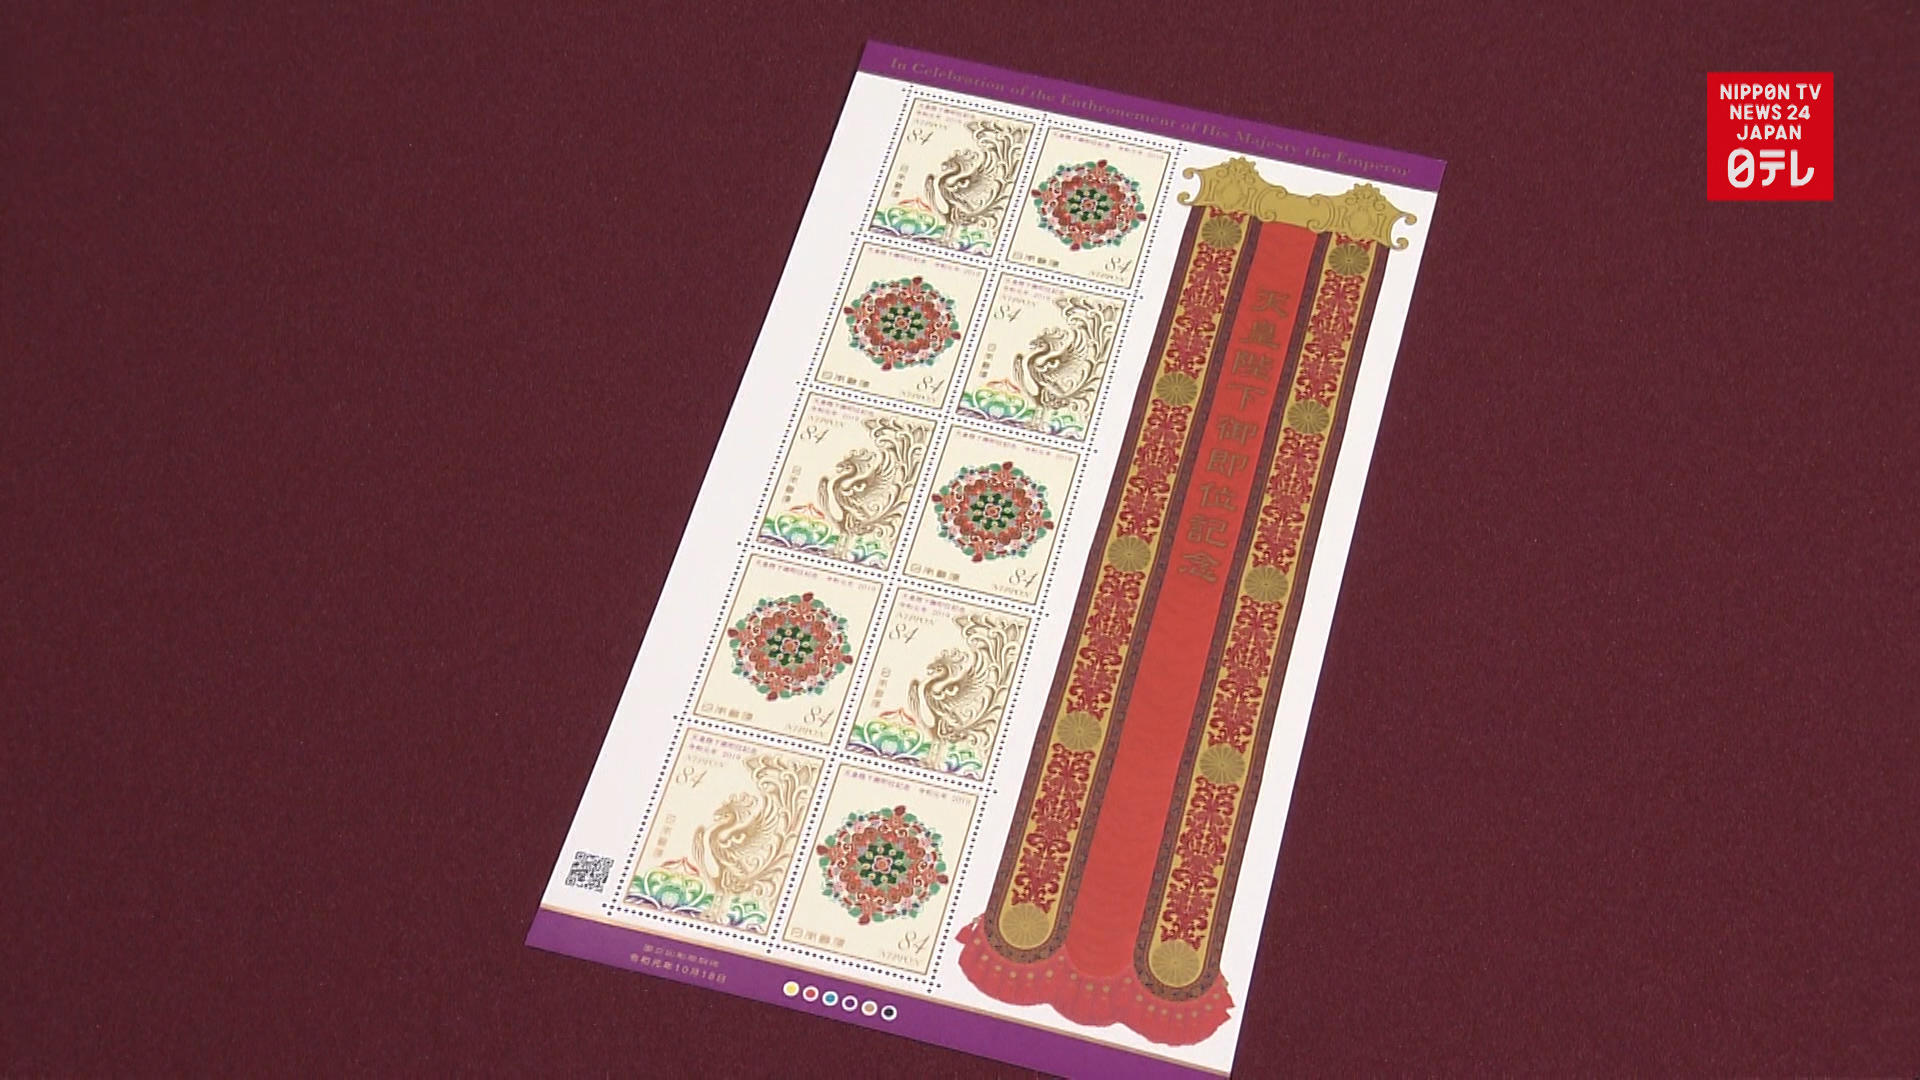 Enthronement stamps on sale